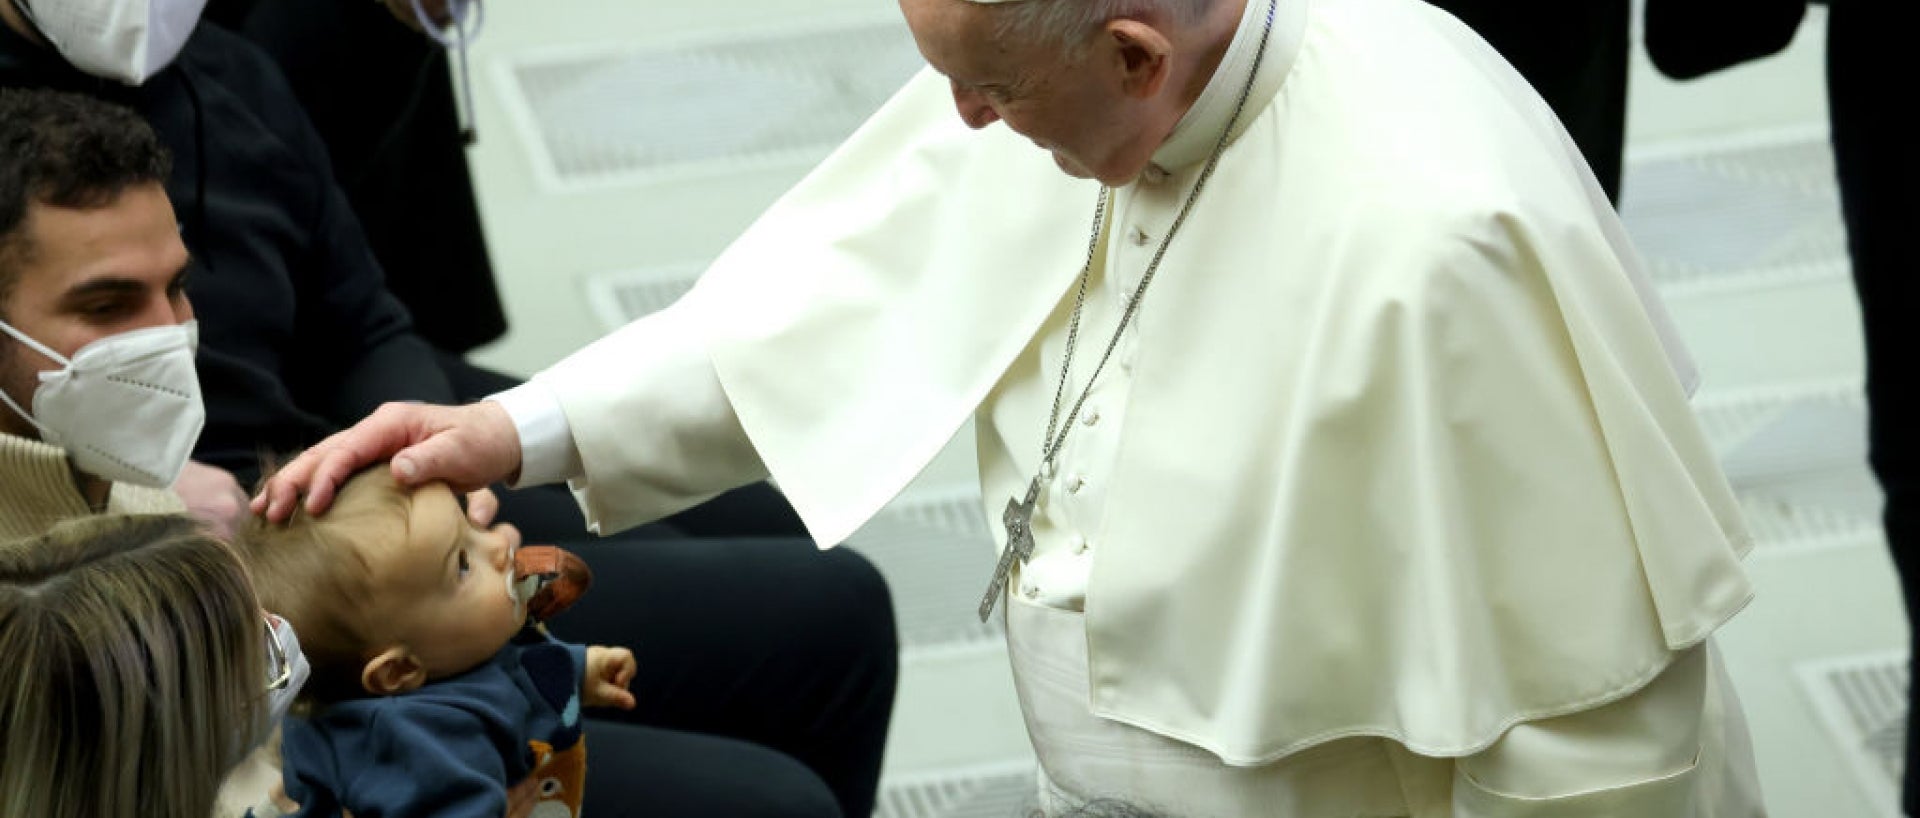 Pope Francis petting a child's head in a crowd